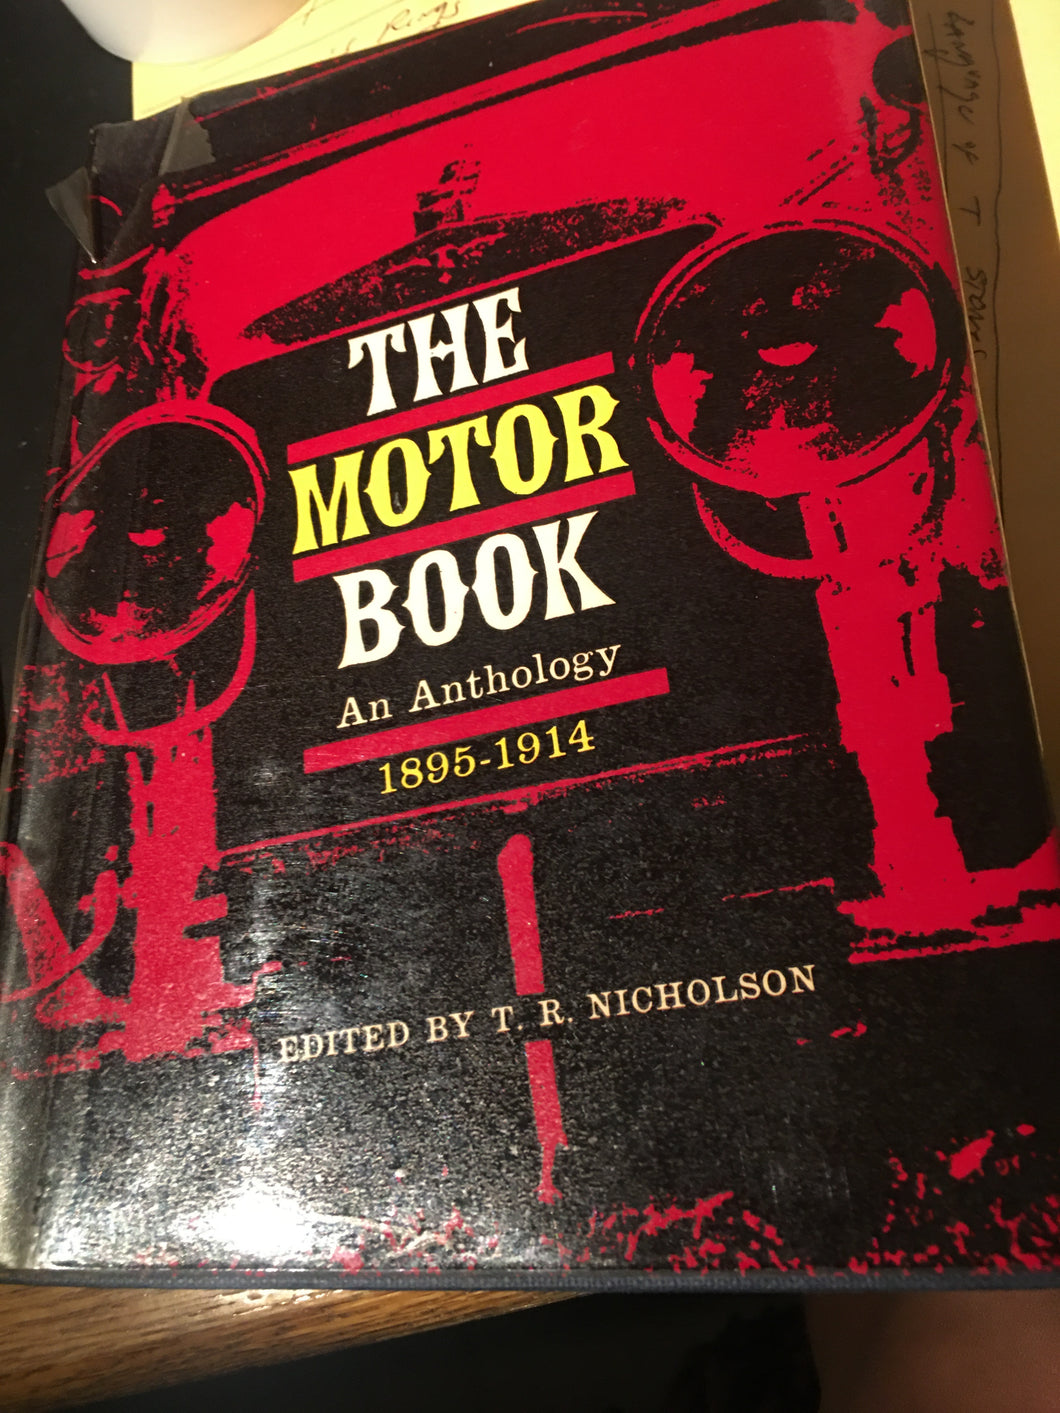 The Motor Book. An anthology 1895-1914. Edited by T. R. Nicholson. With illustrations